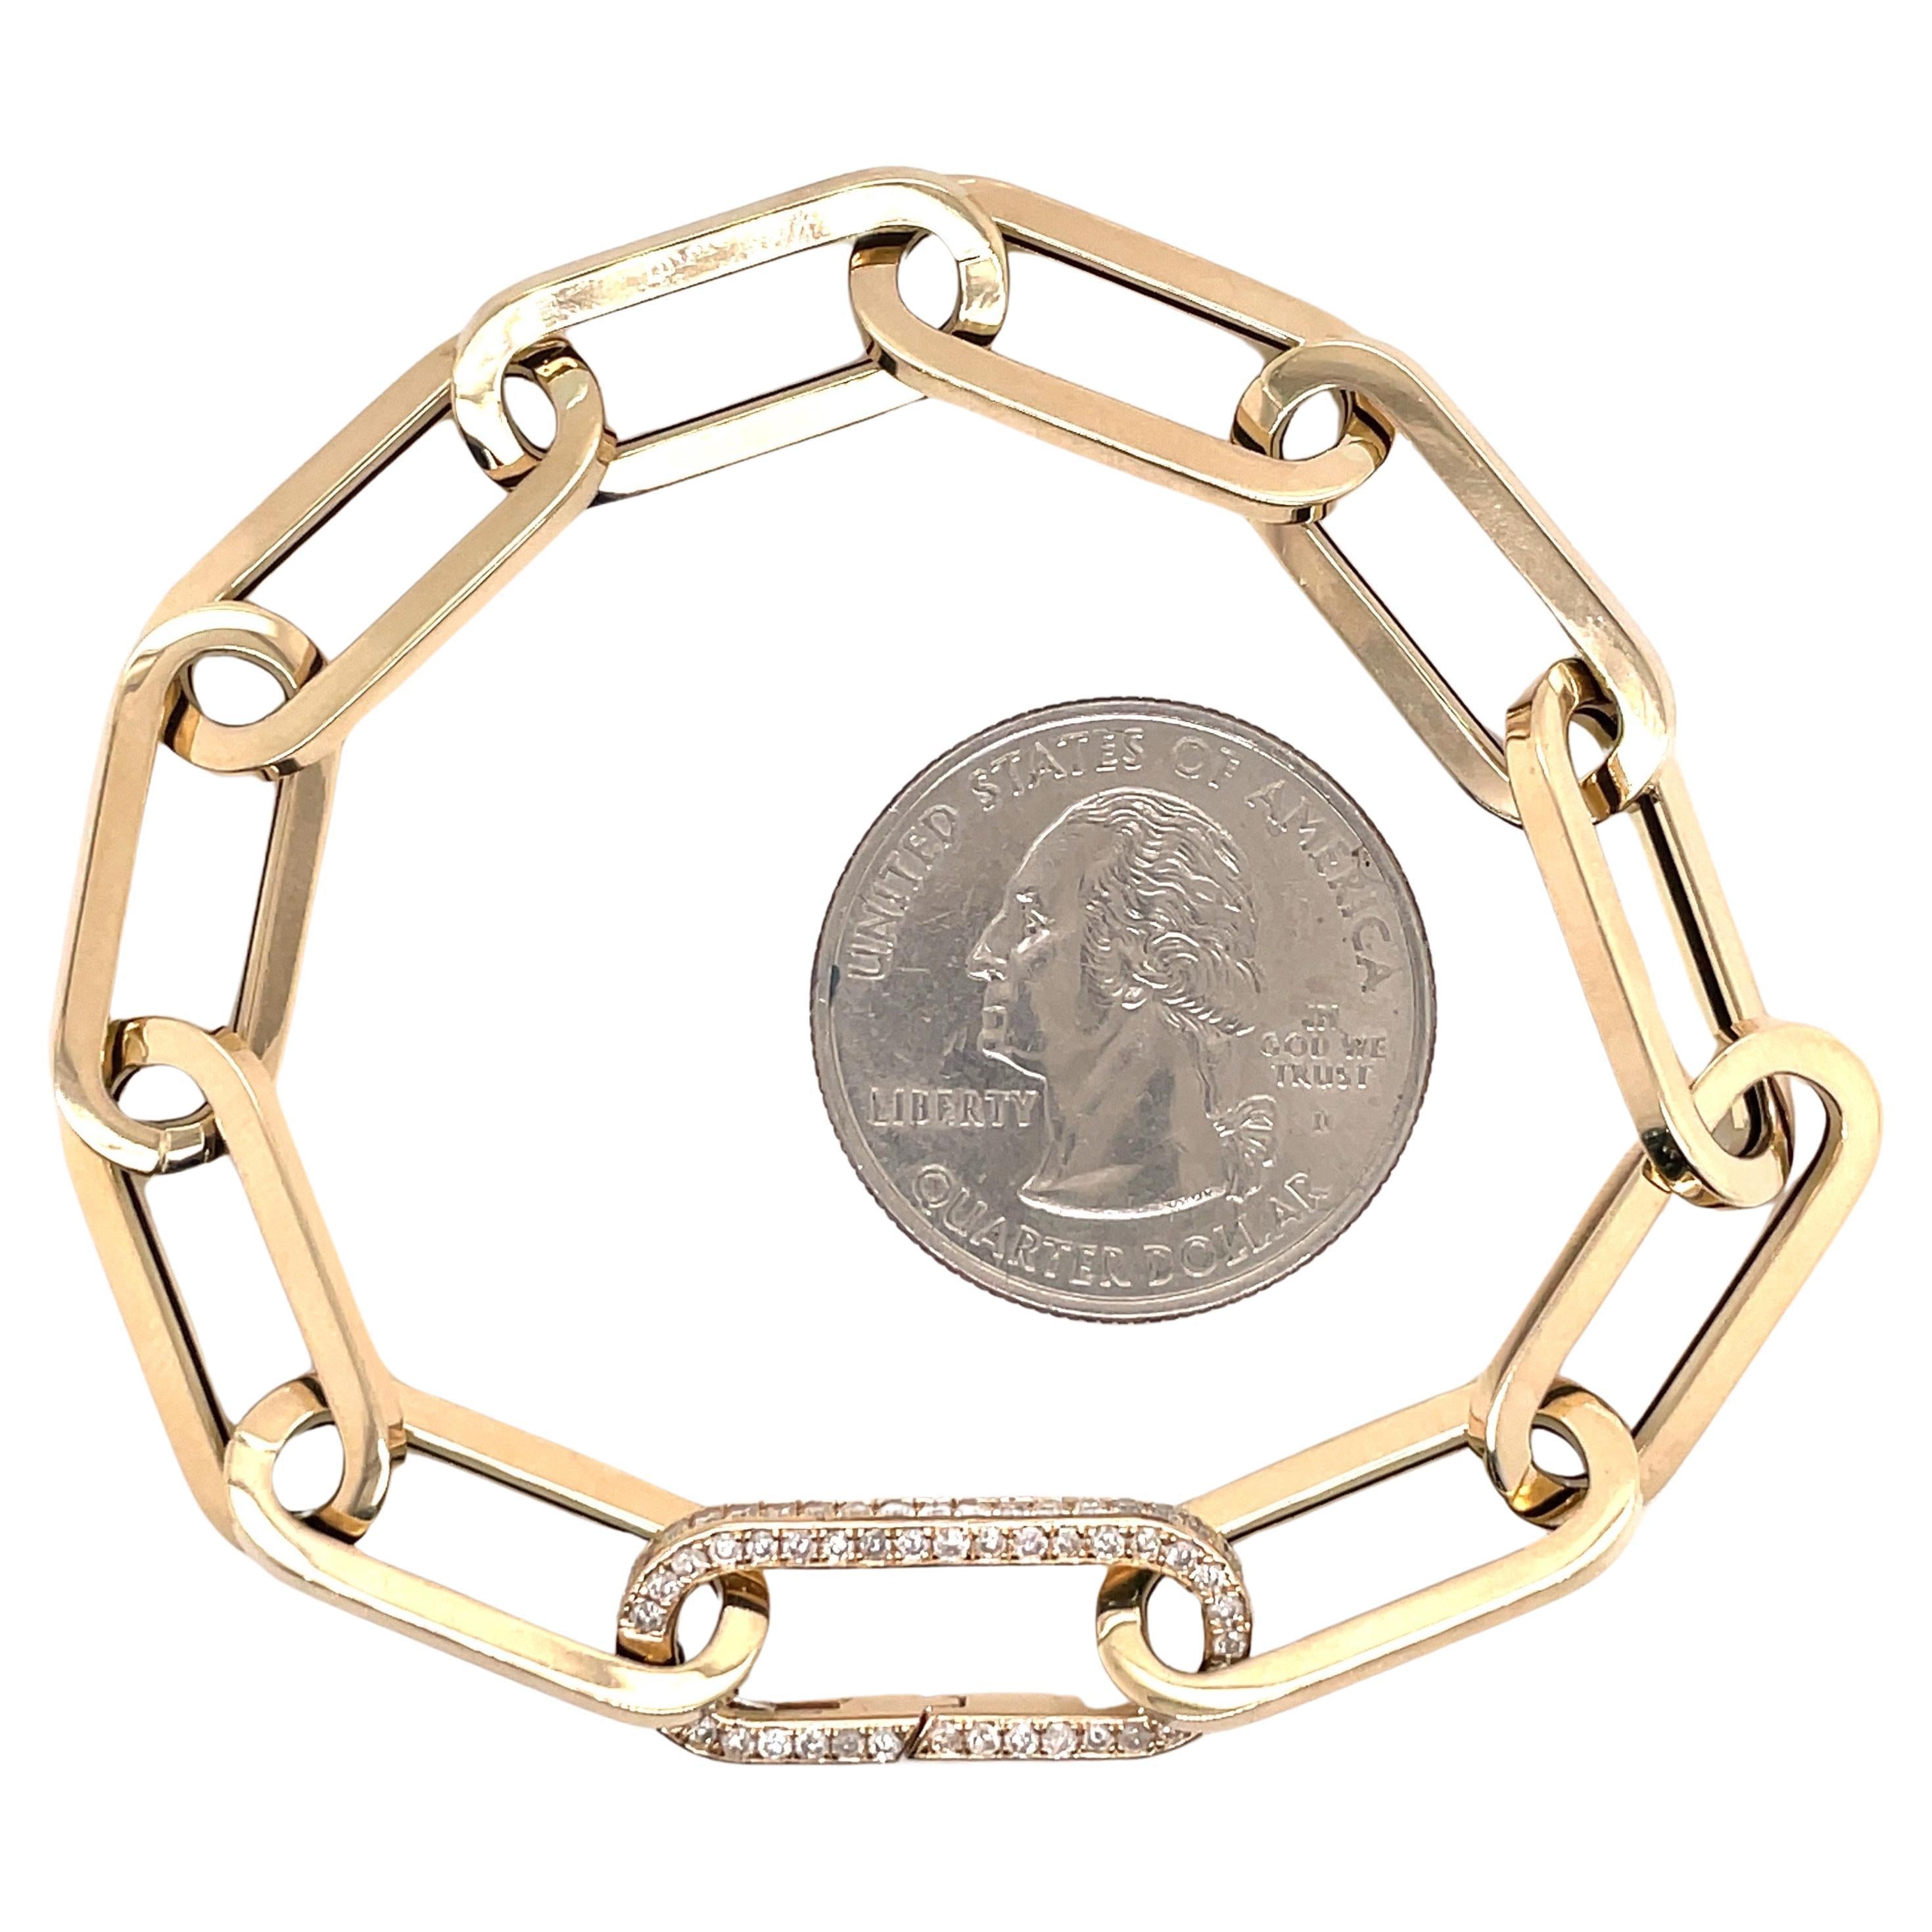 Made in Italy, this 14 karat yellow gold features 10 oversized paperclip links with one diamond clasp.

Available in smaller sizes.
Clasp available in white, rose & yellow gold
Clasp available in different styles. 
Gold links weigh 8.4 grams